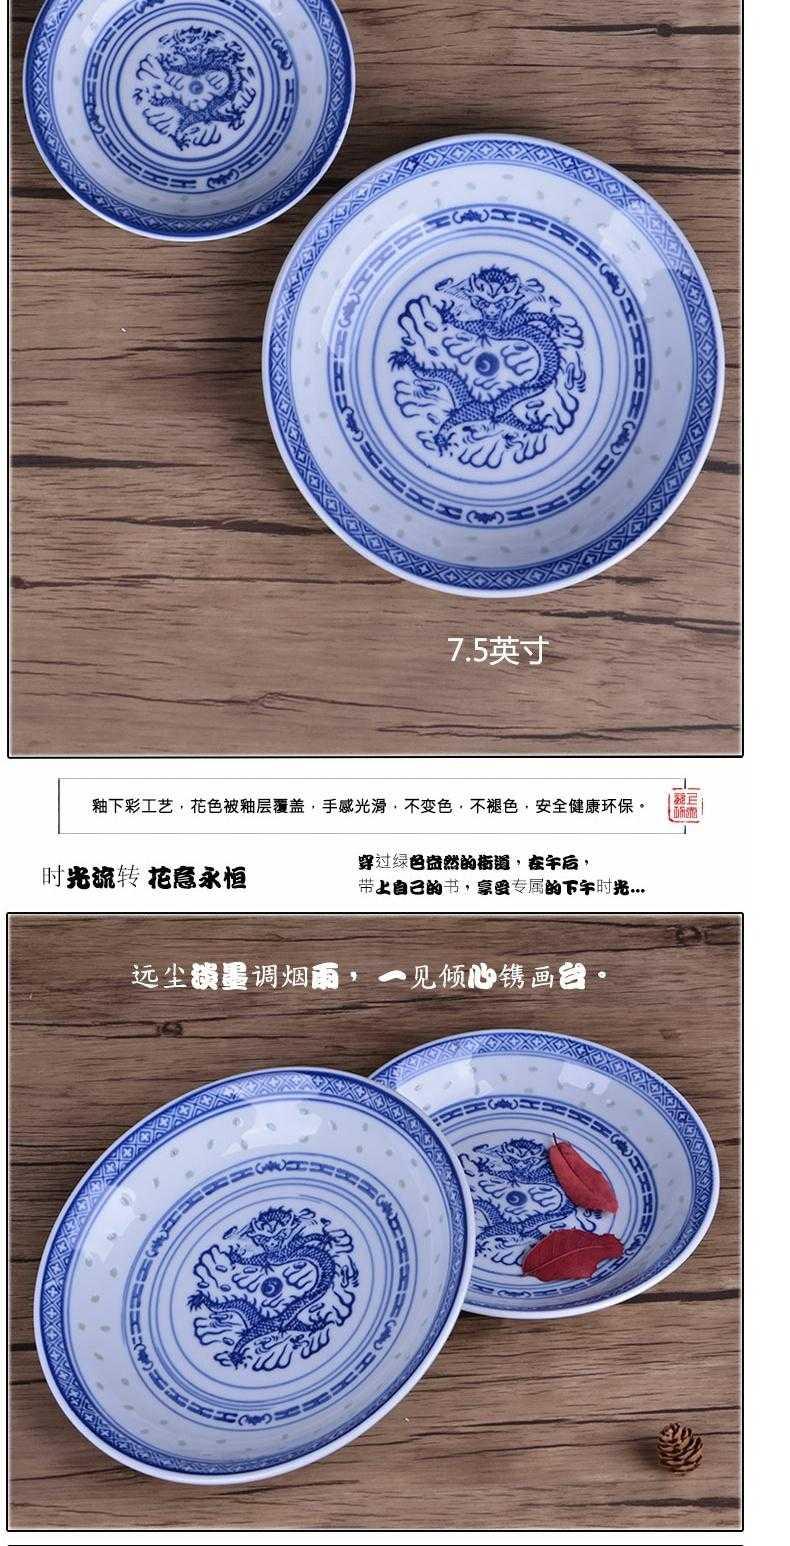 Jingdezhen ceramic traditional nostalgic see colour porcelain dish plate under glaze blue and white household soup thick Chinese style restoring ancient ways plate panlong lines